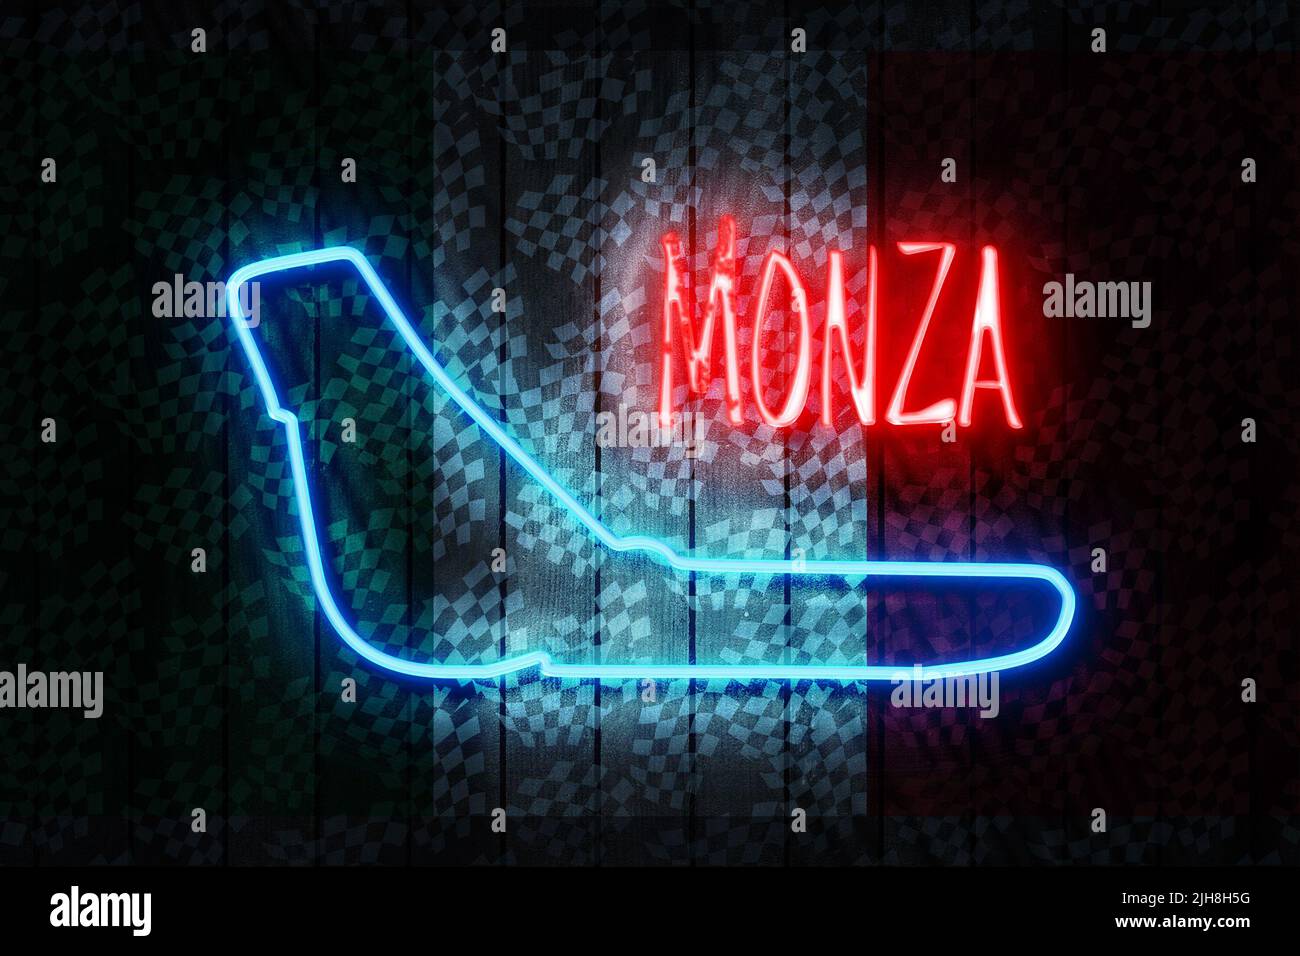 Monza neon sign on a dark wooden wall, 3D illustration. Stock Photo